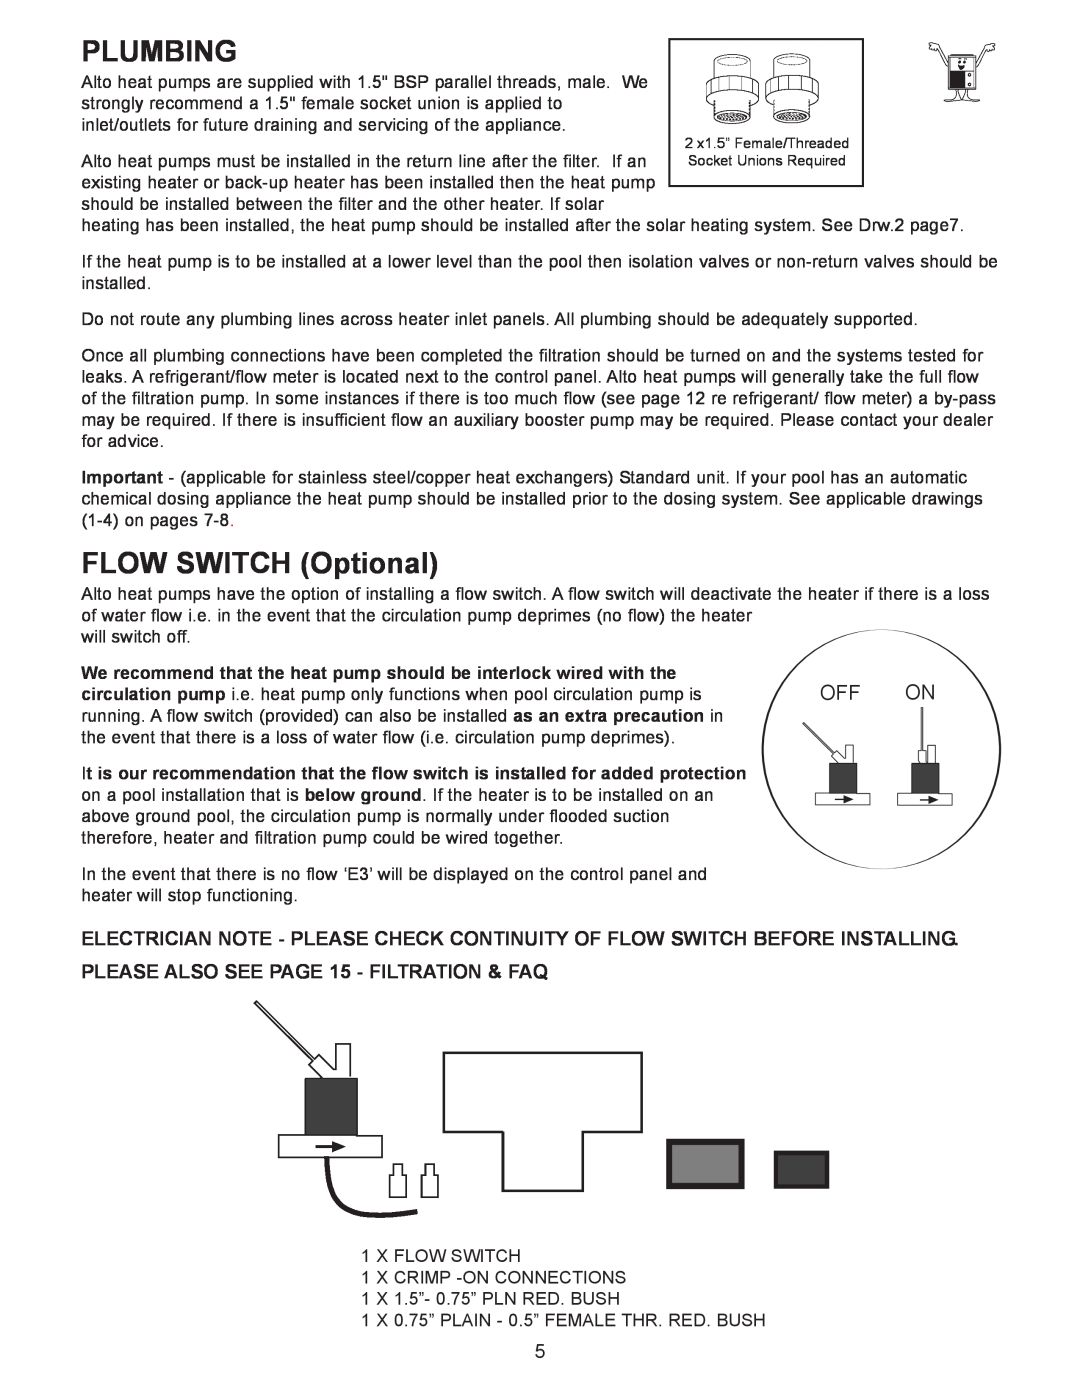 Sigma AS-H50Y, AS-H60Y, AS-H40Y installation manual Plumbing, FLOW SWITCH Optional 